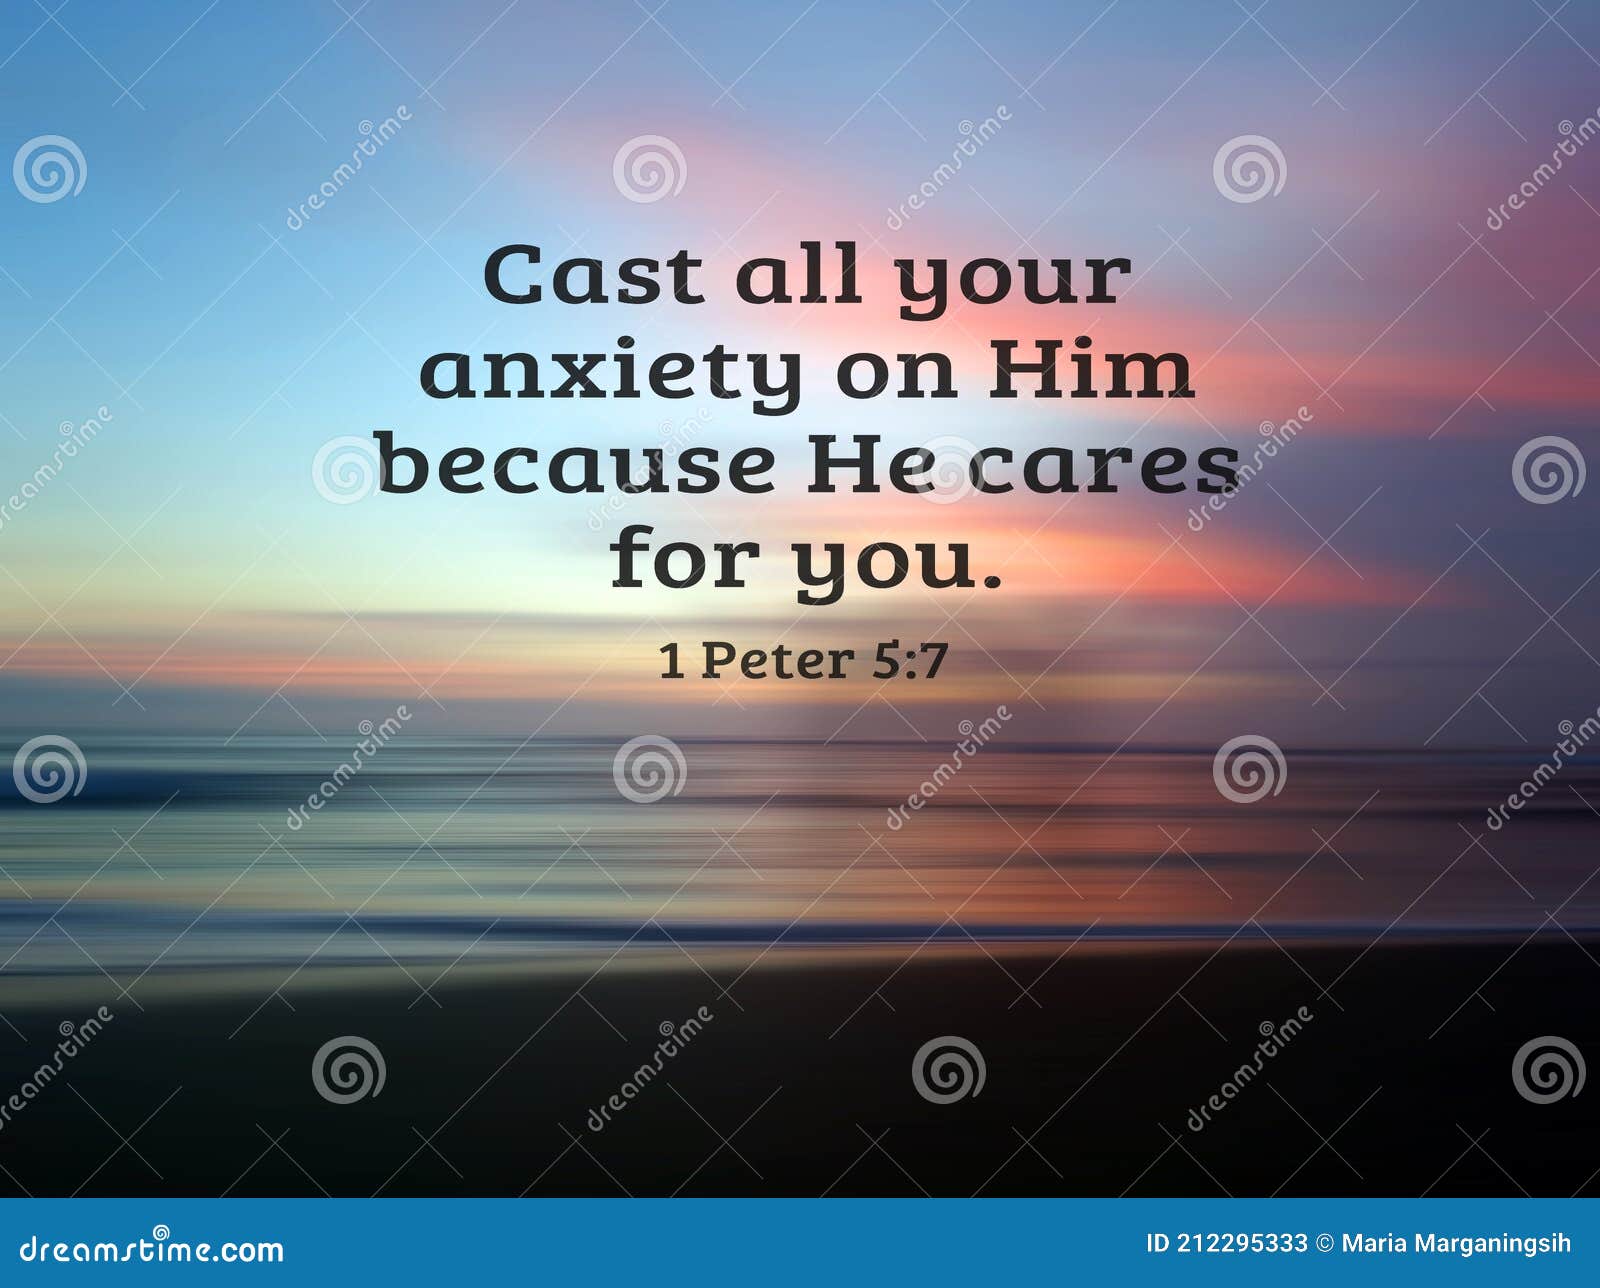 cast all your anxiety on him because he cares for you. bible verse: 1 peter 5:7 on soft pink and blue colorful sunset sunrise sky